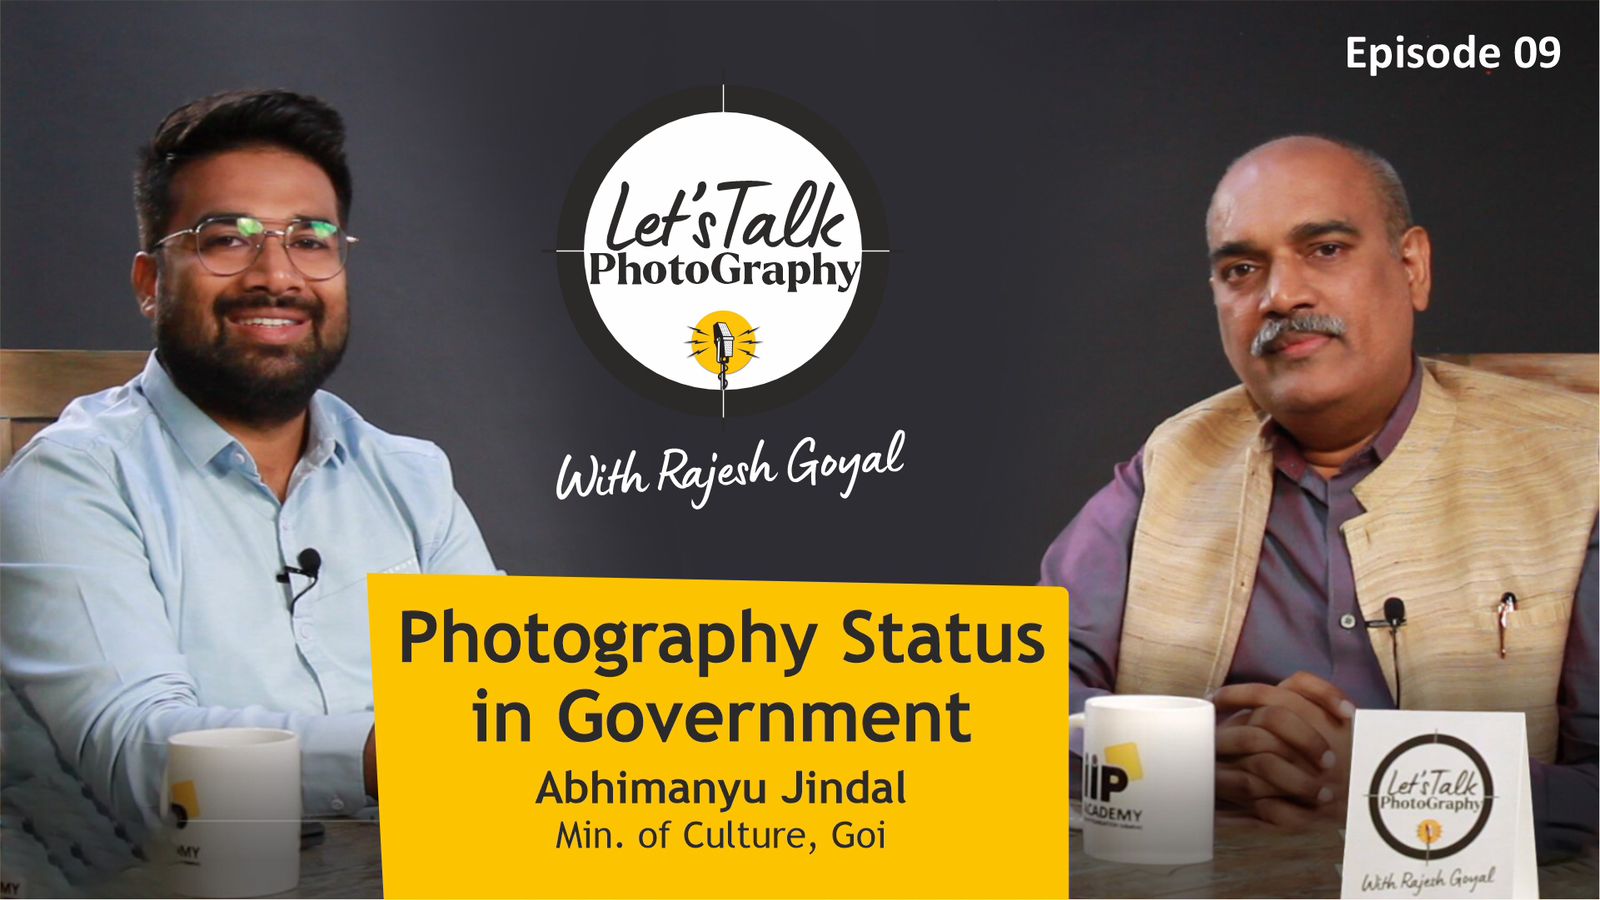  IIP Presents: Let's Talk Photography with Rajesh Goyal - A Glimpse into the Government's Perspective on Photography as an Art and Industry